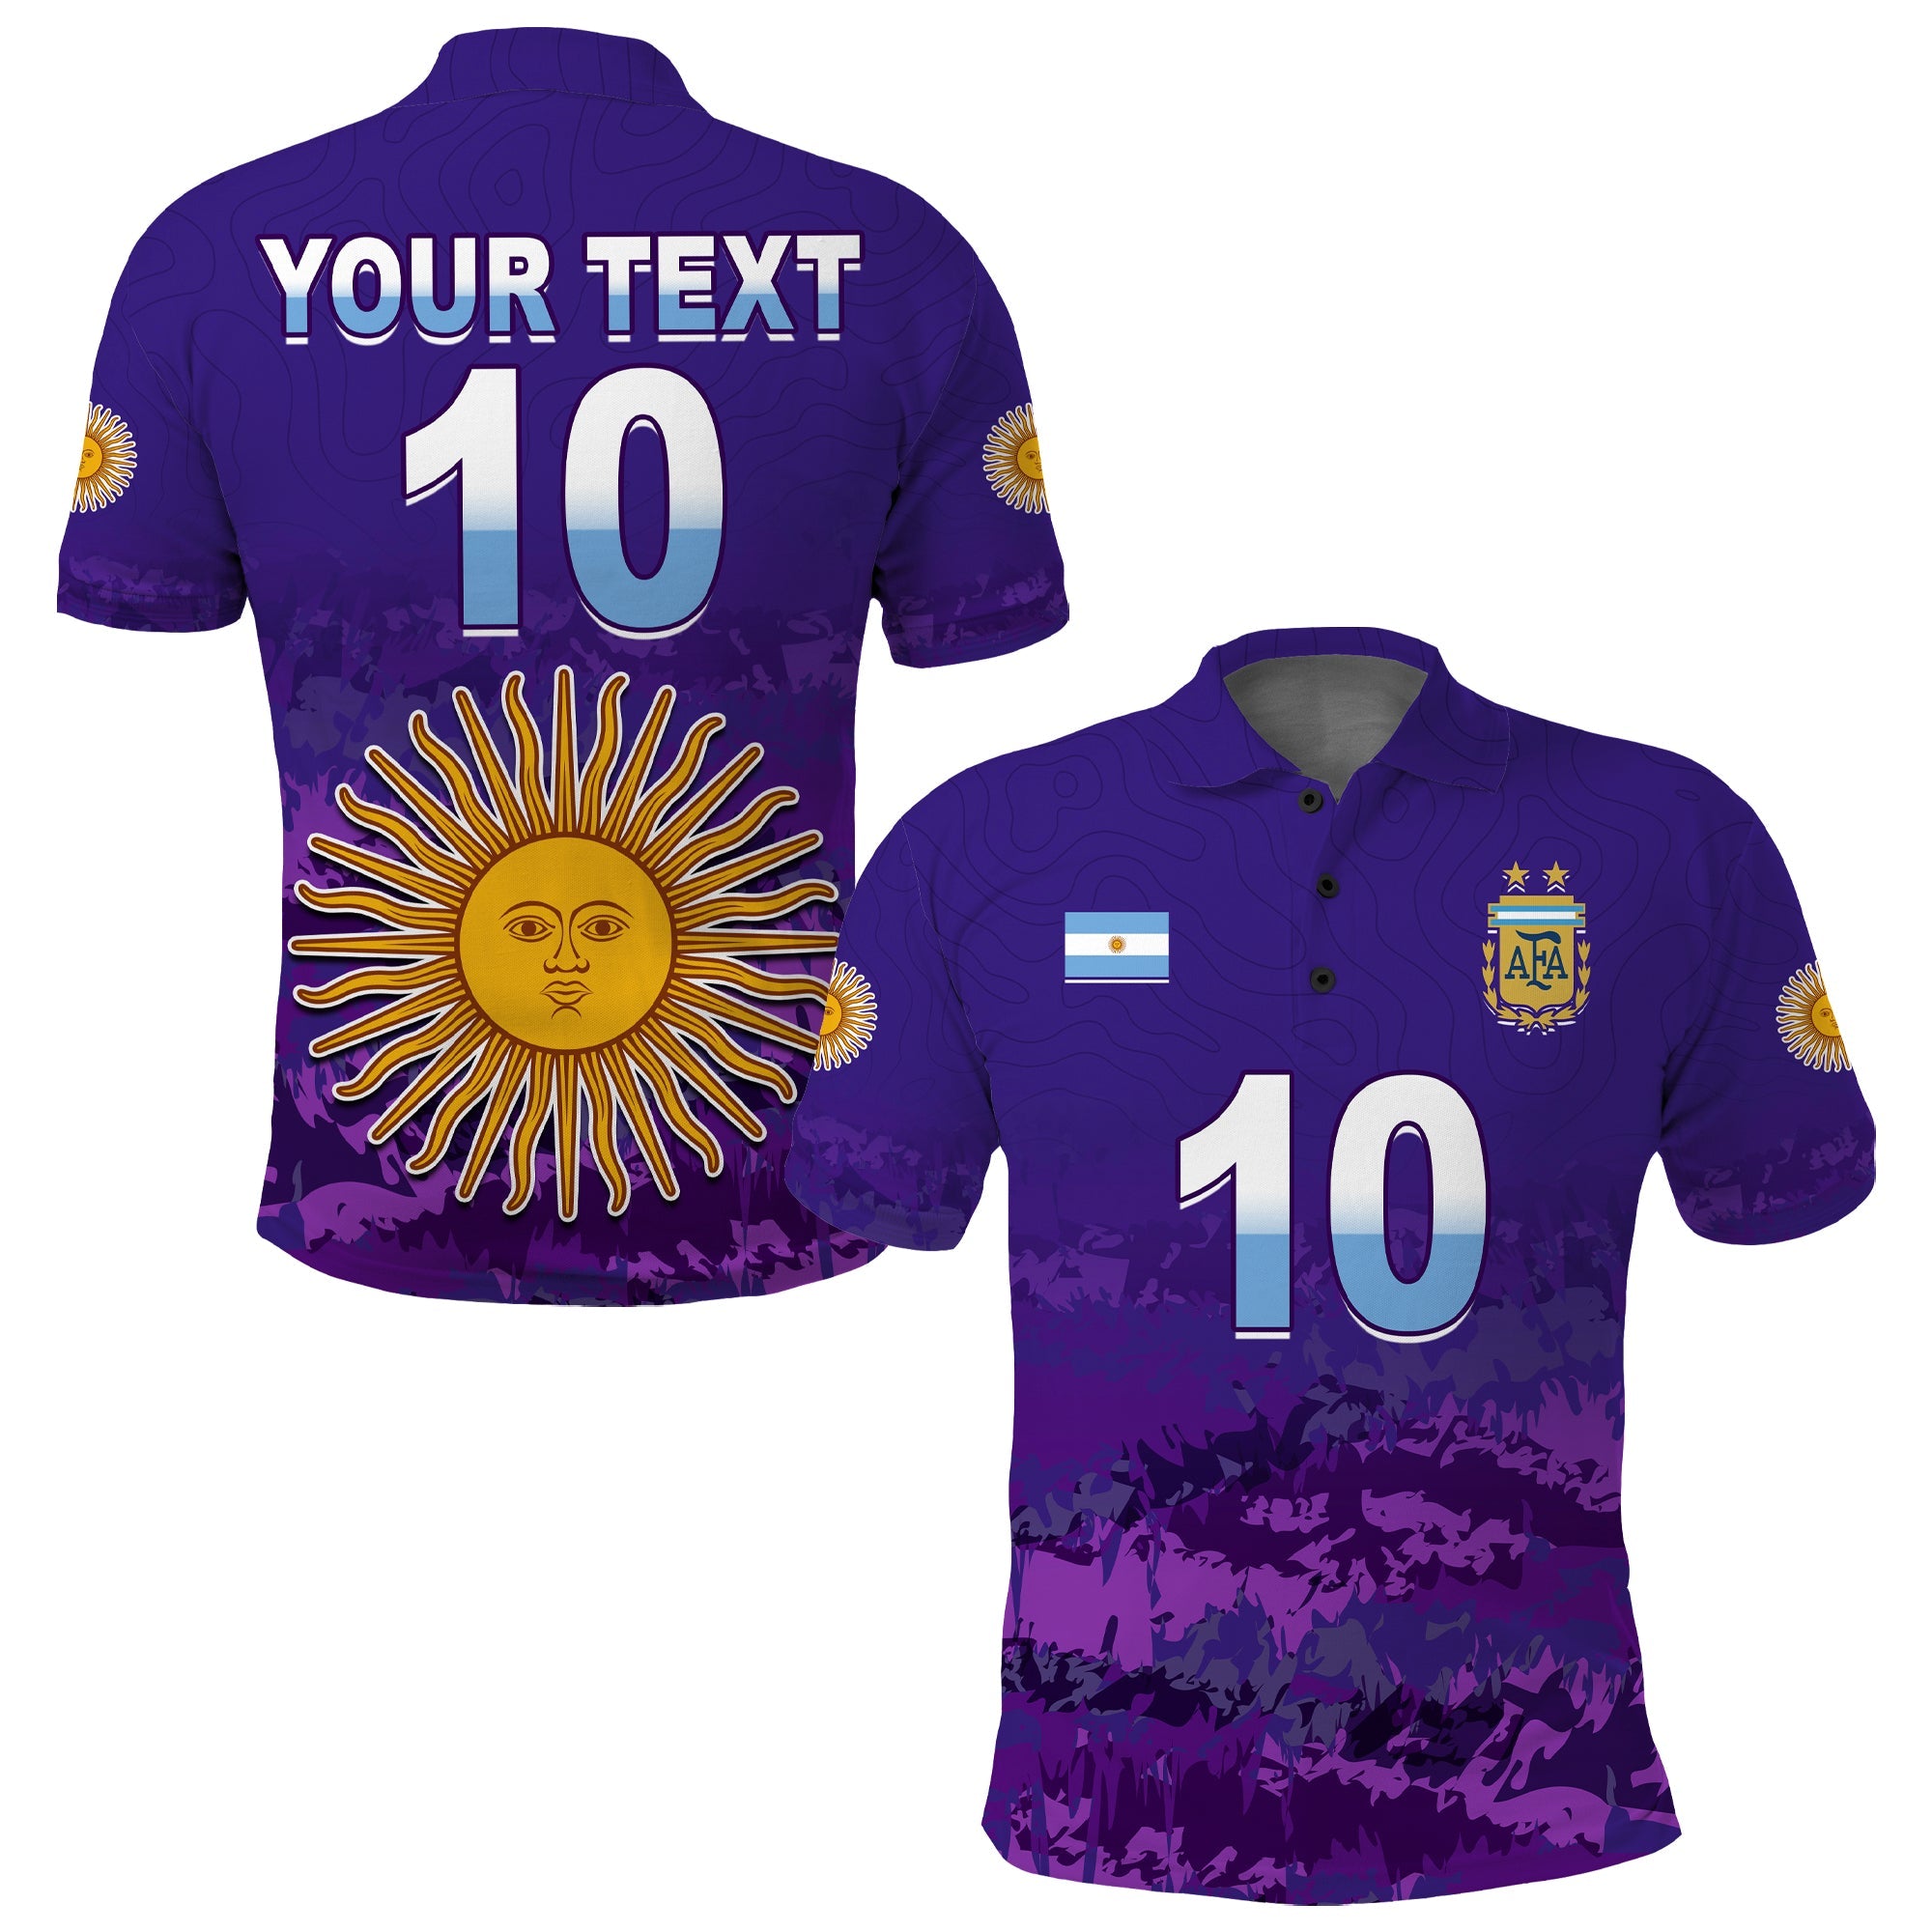 custom-text-and-number-argentina-football-polo-shirt-go-champions-la-albiceleste